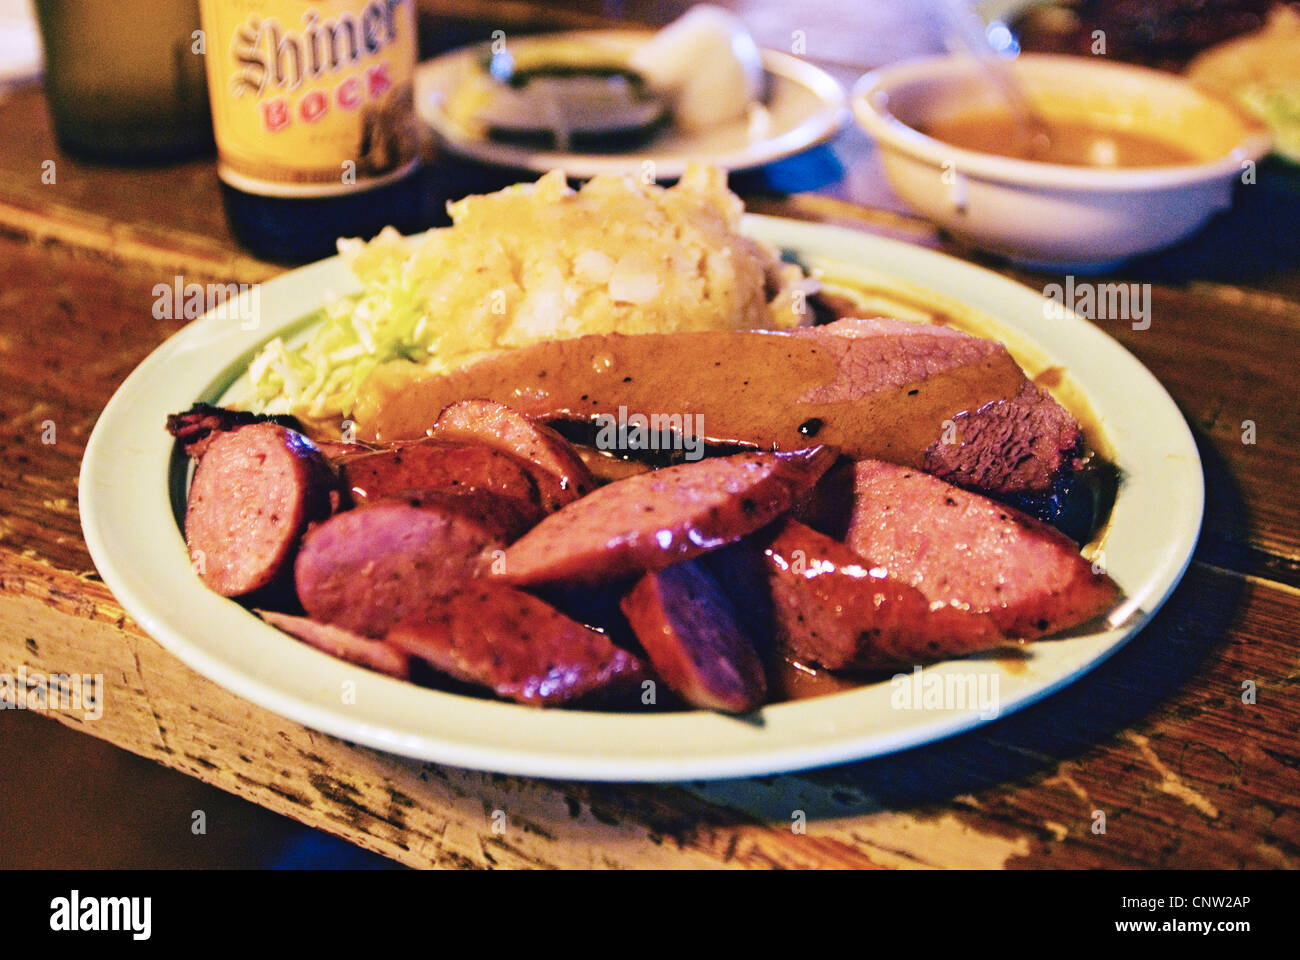 A meal at Salt Lick Bar-B-Que in Dripping Springs, TX. Stock Photo